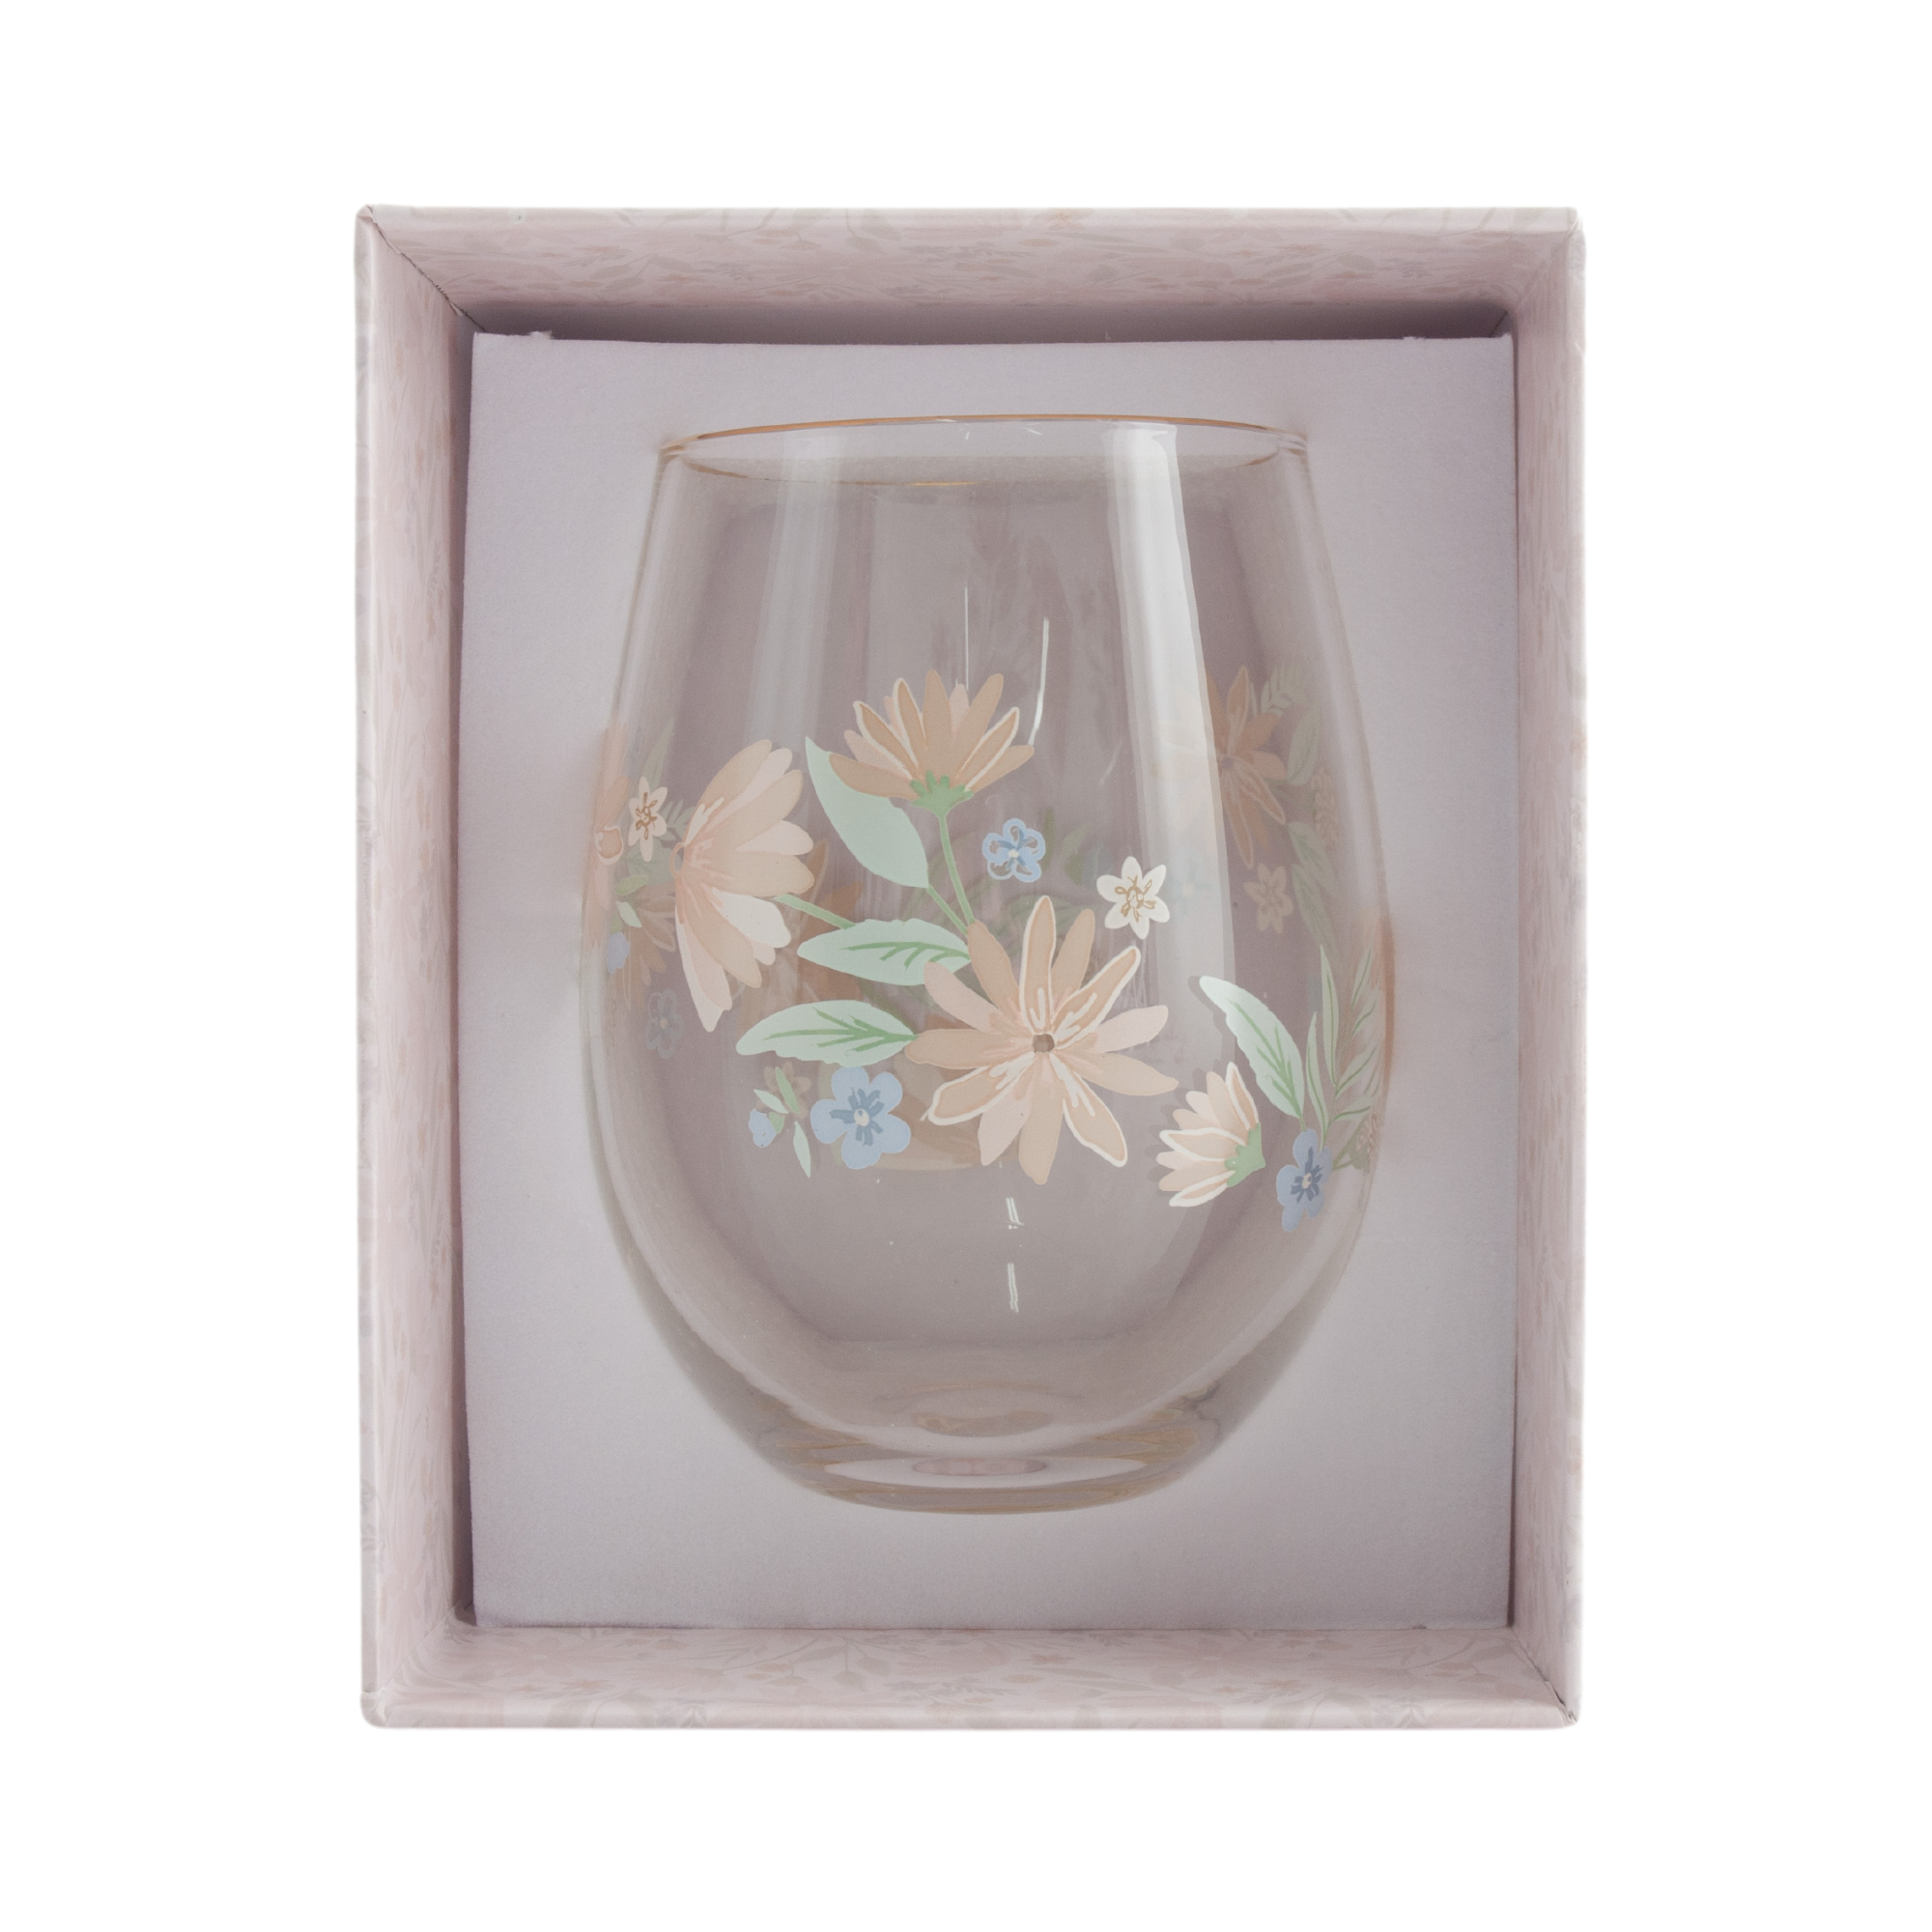 Printed Stemless Glass - Blushing Floral